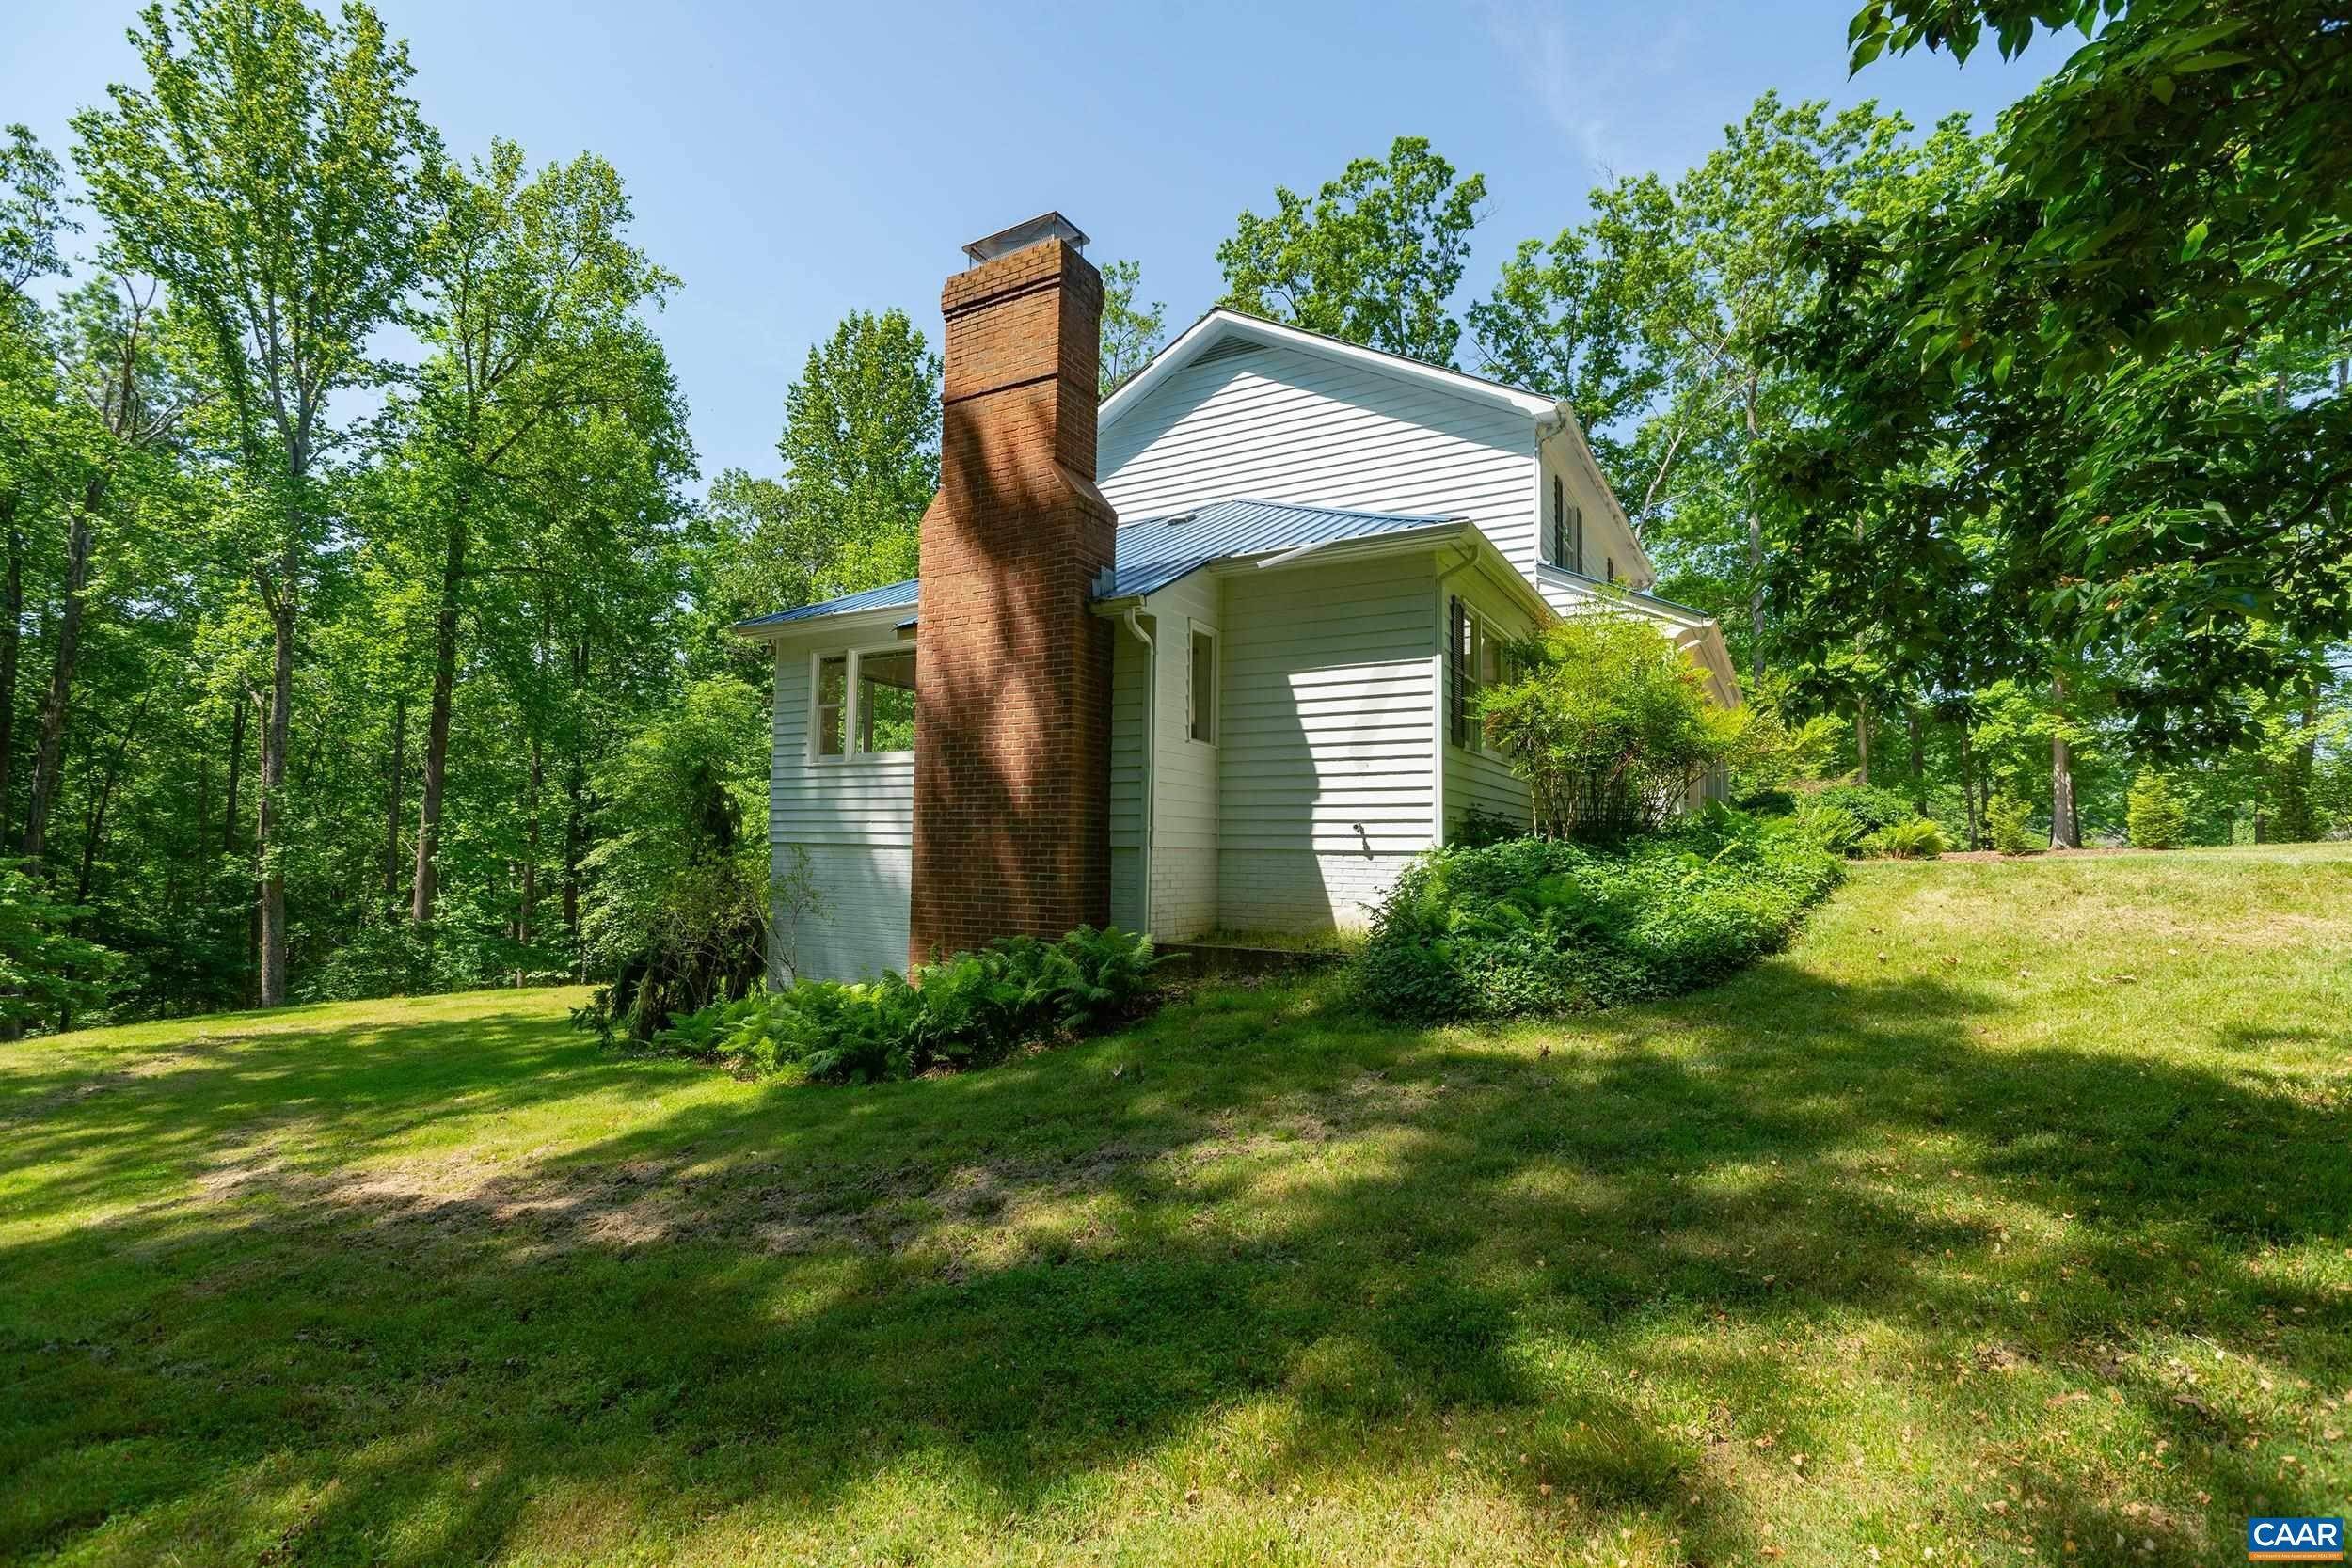 41. Single Family Homes for Sale at 2601 CARDINAL RIDGE Road Charlottesville, Virginia 22901 United States